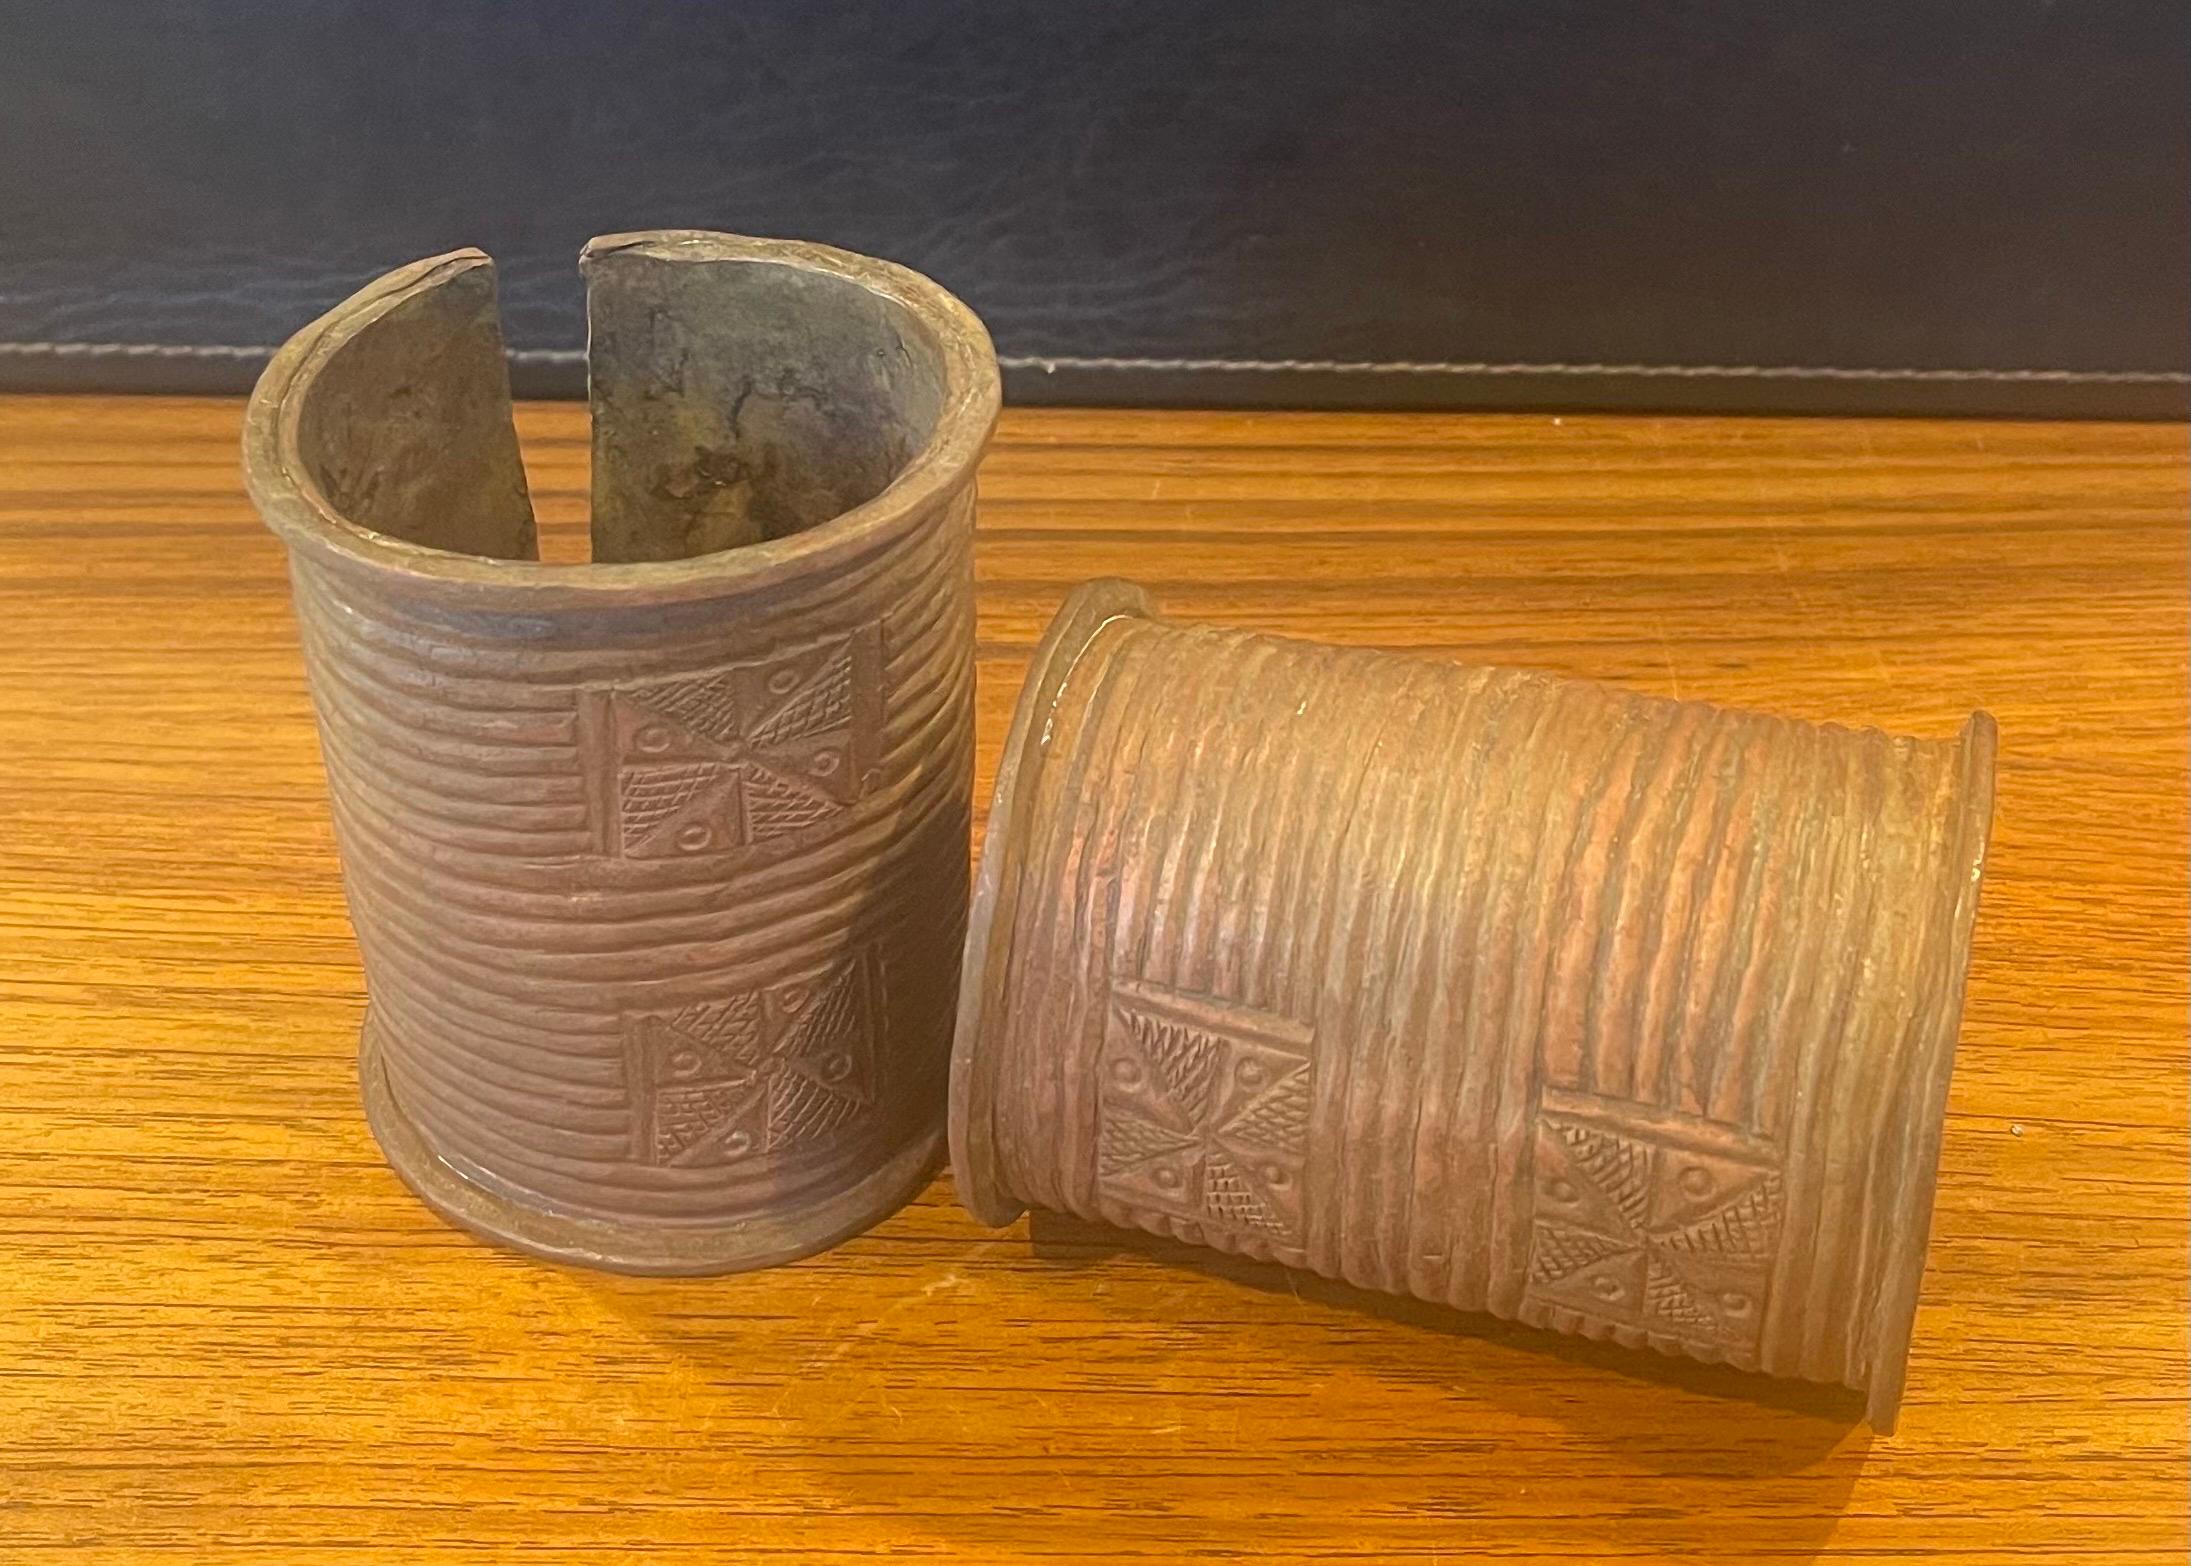 A very nice pair of African Igbo open-sided cast copper cuff bracelets, circa 1980s. The pair are a fine example of an open-sided cast copper cuff bracelet or wrist guard that is decorated with both geometric and figurative motifs etched and